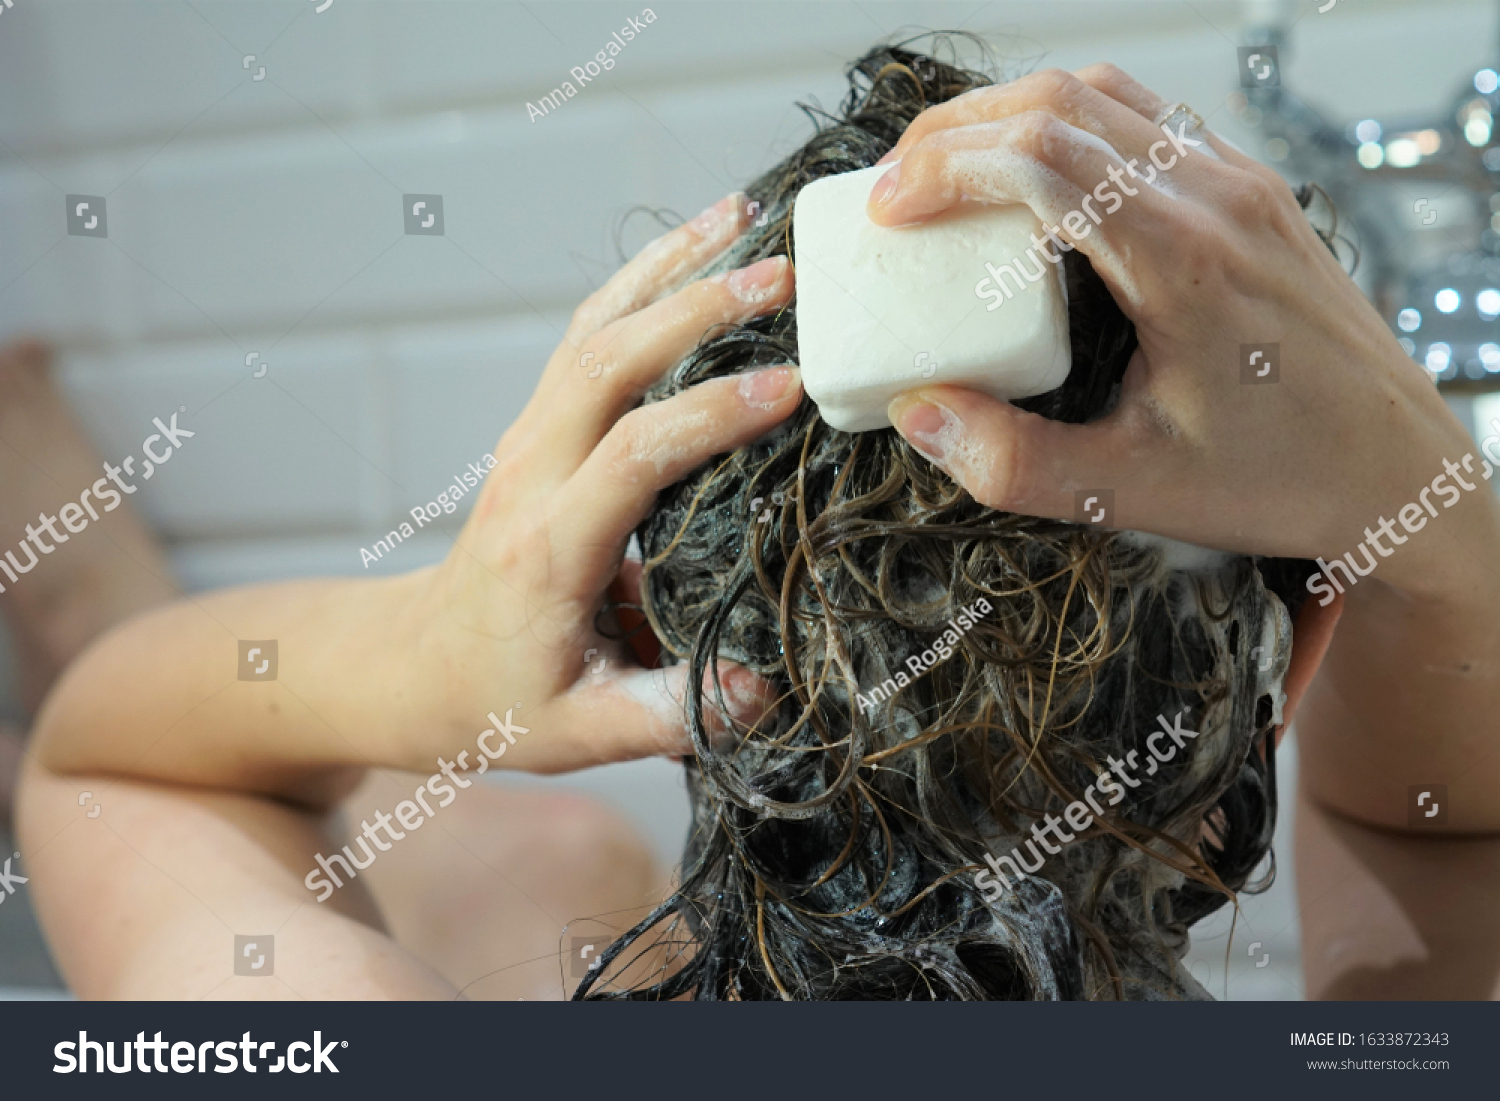 Caucasian woman washes her brown hair with shampoo bar or soap, zero waste concept #1633872343